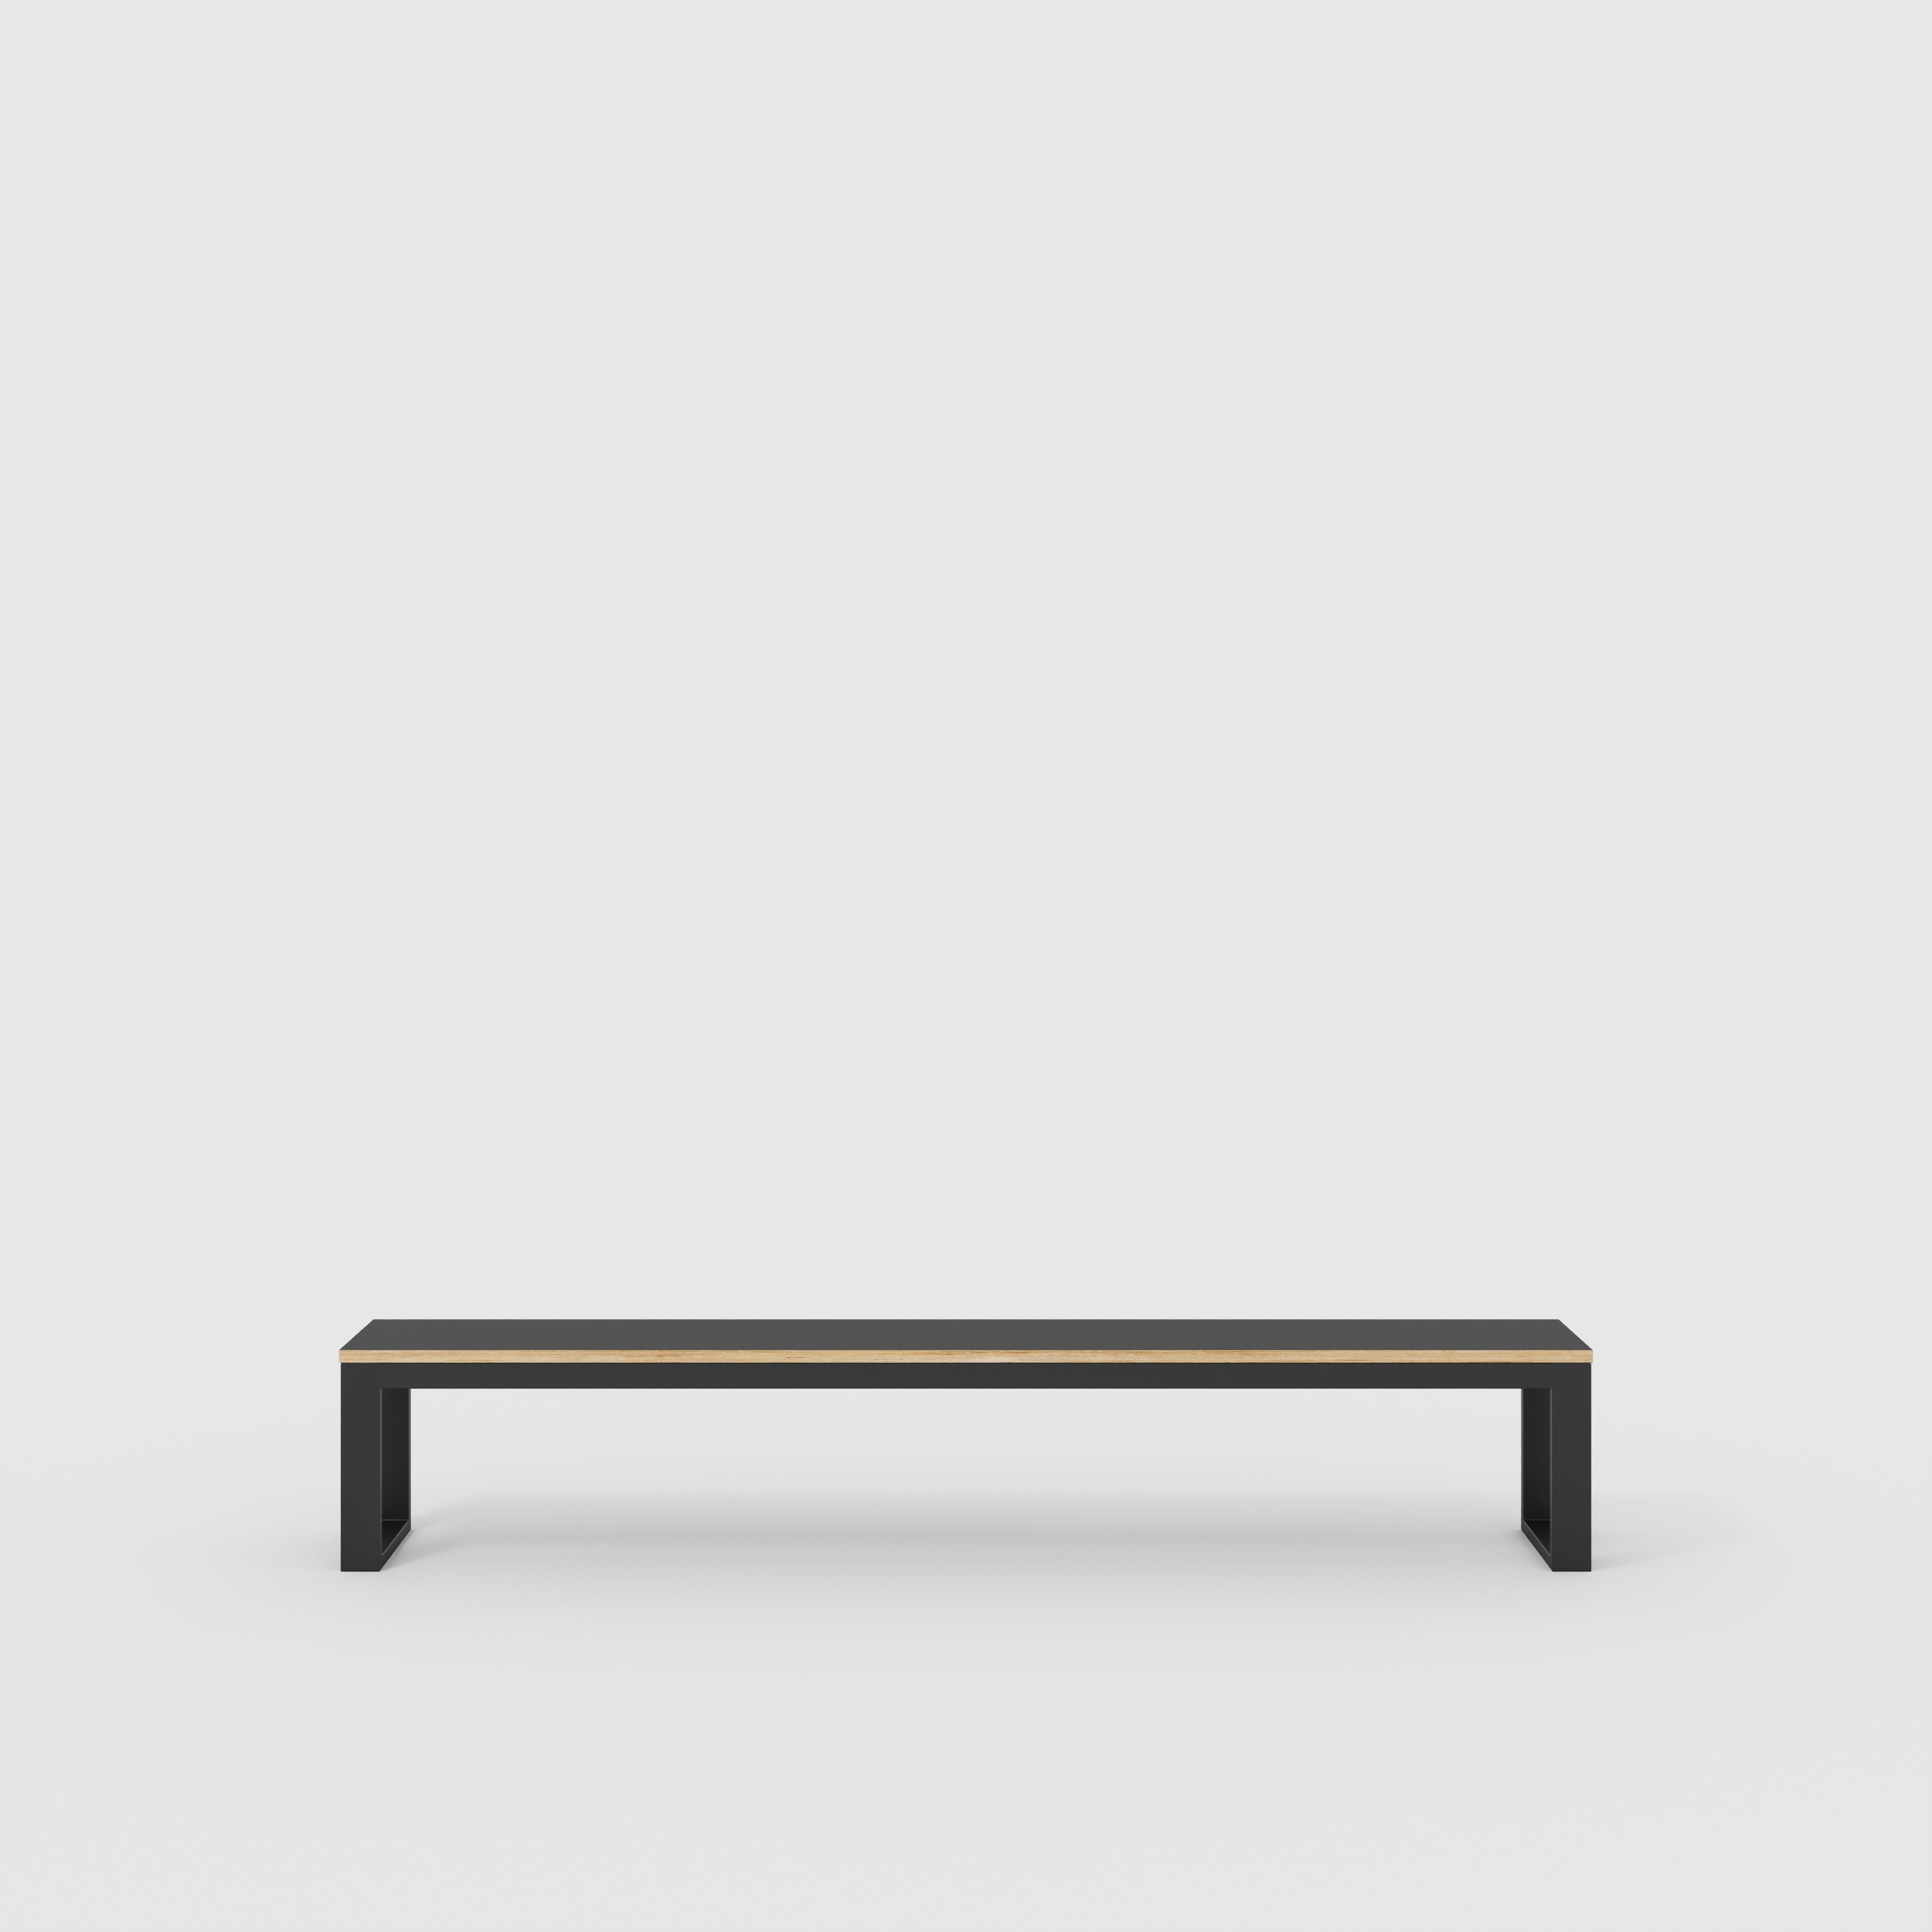 Bench Seat with Black Industrial Frame - Formica Diamond Black - 2400(w) x 325(d)